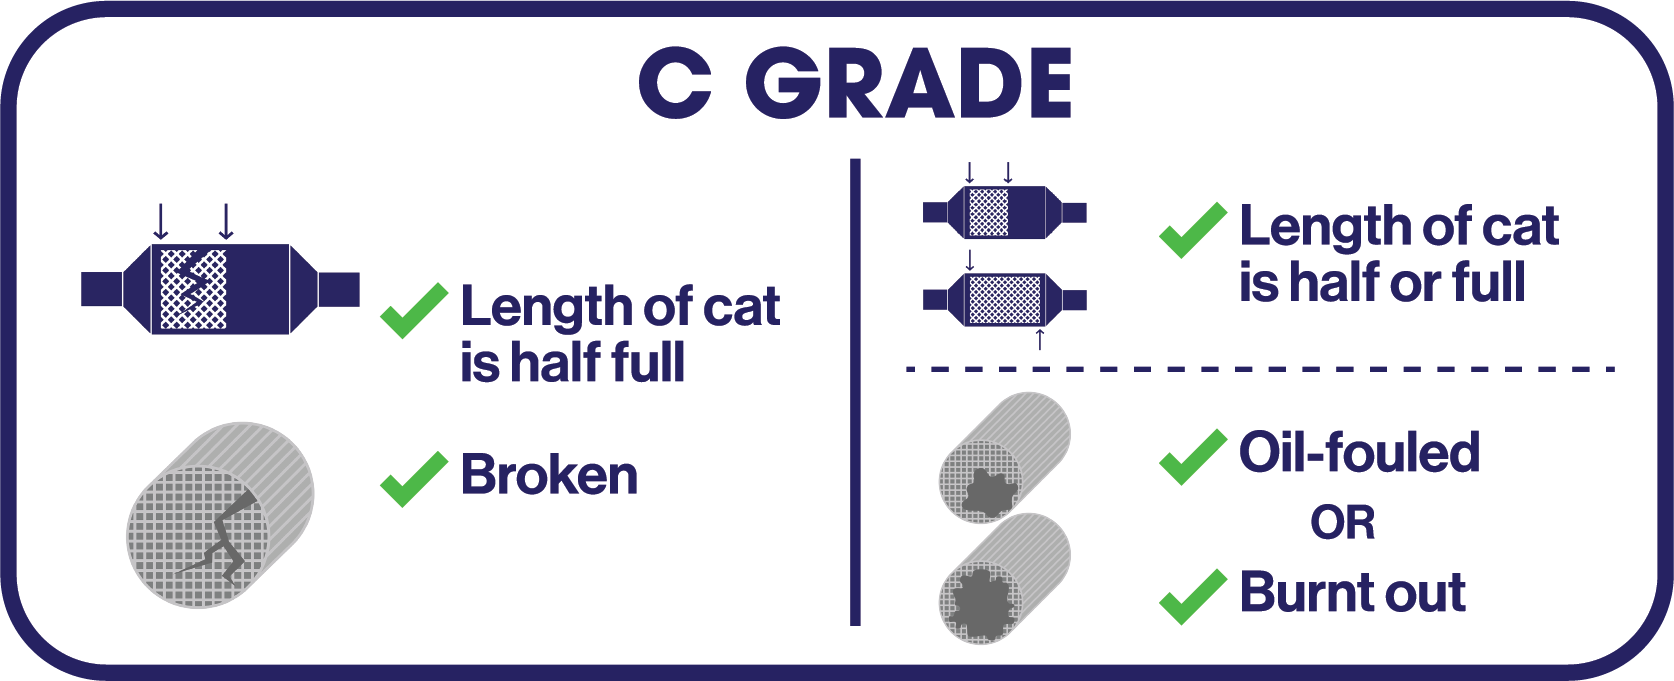 An infographic of Grade C Catalytic Converters